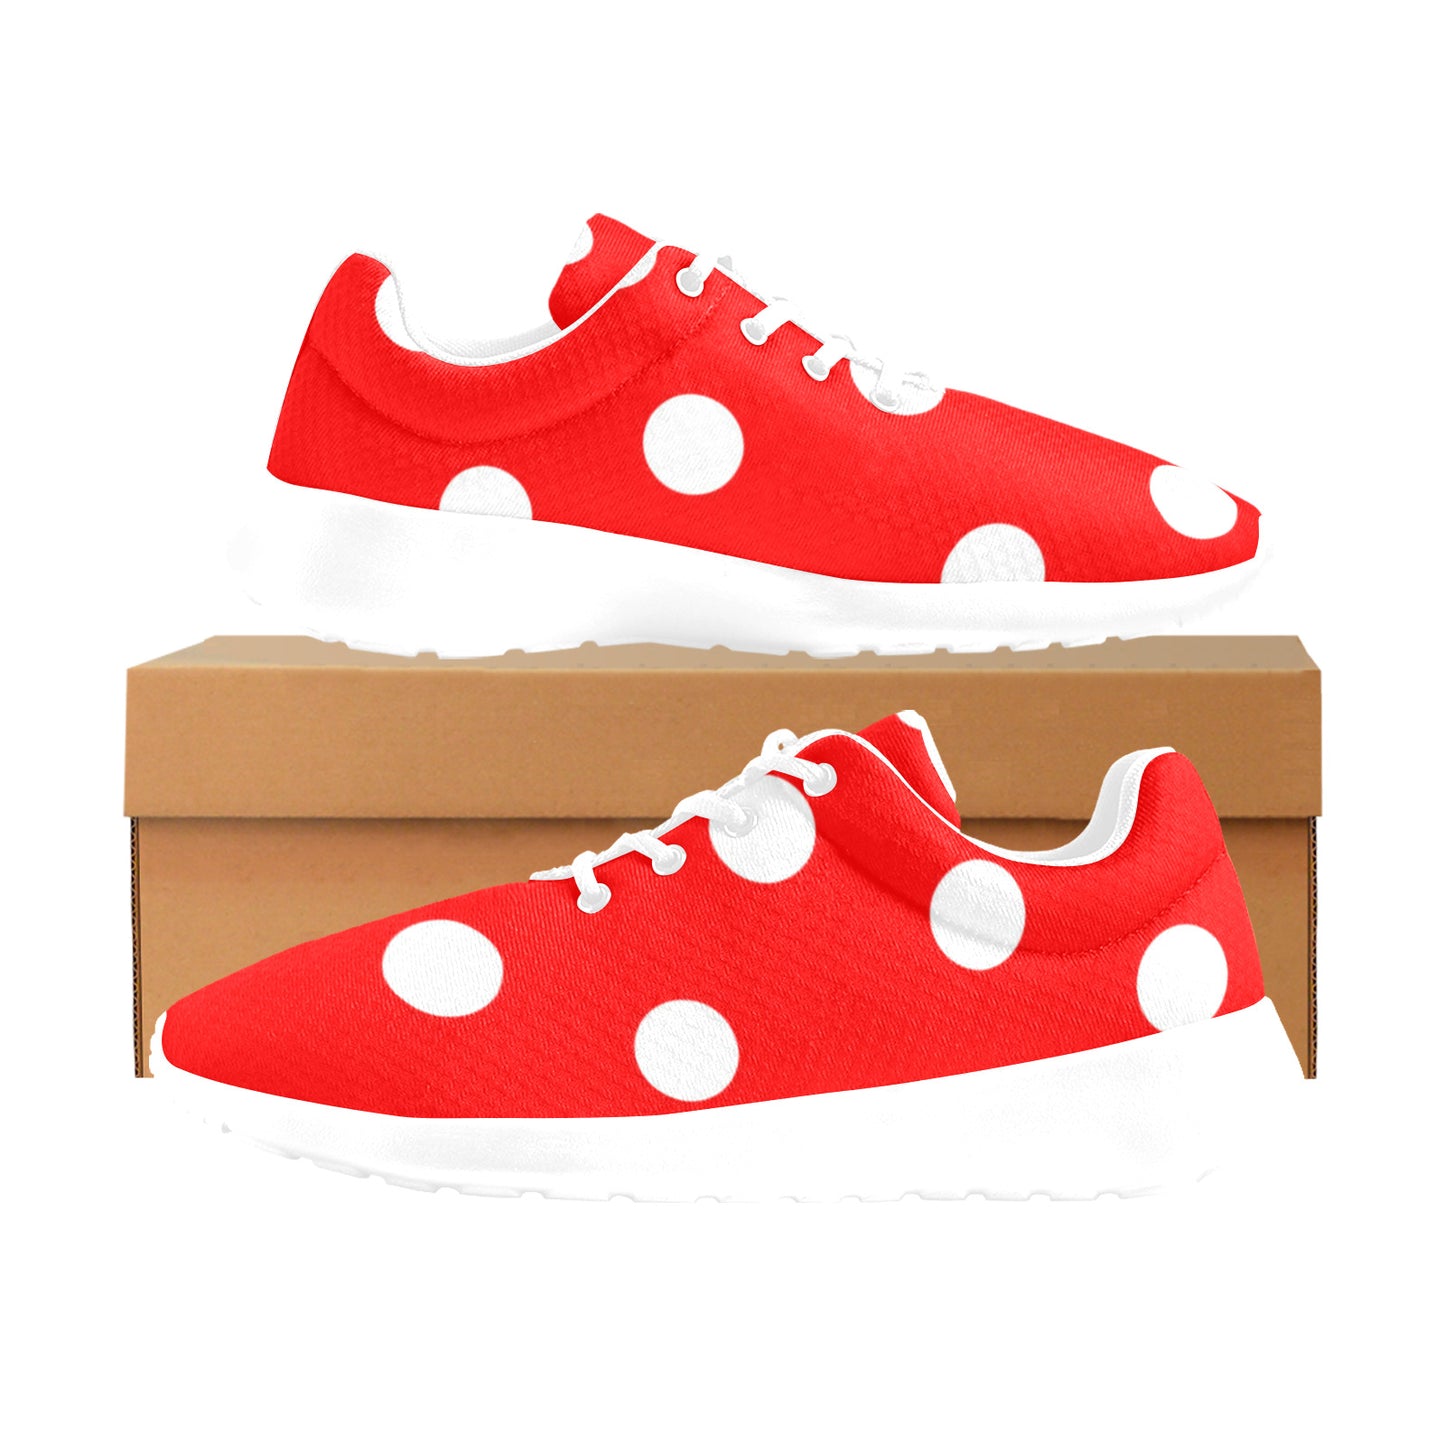 Red With White Polka Dots Men's Athletic Shoes